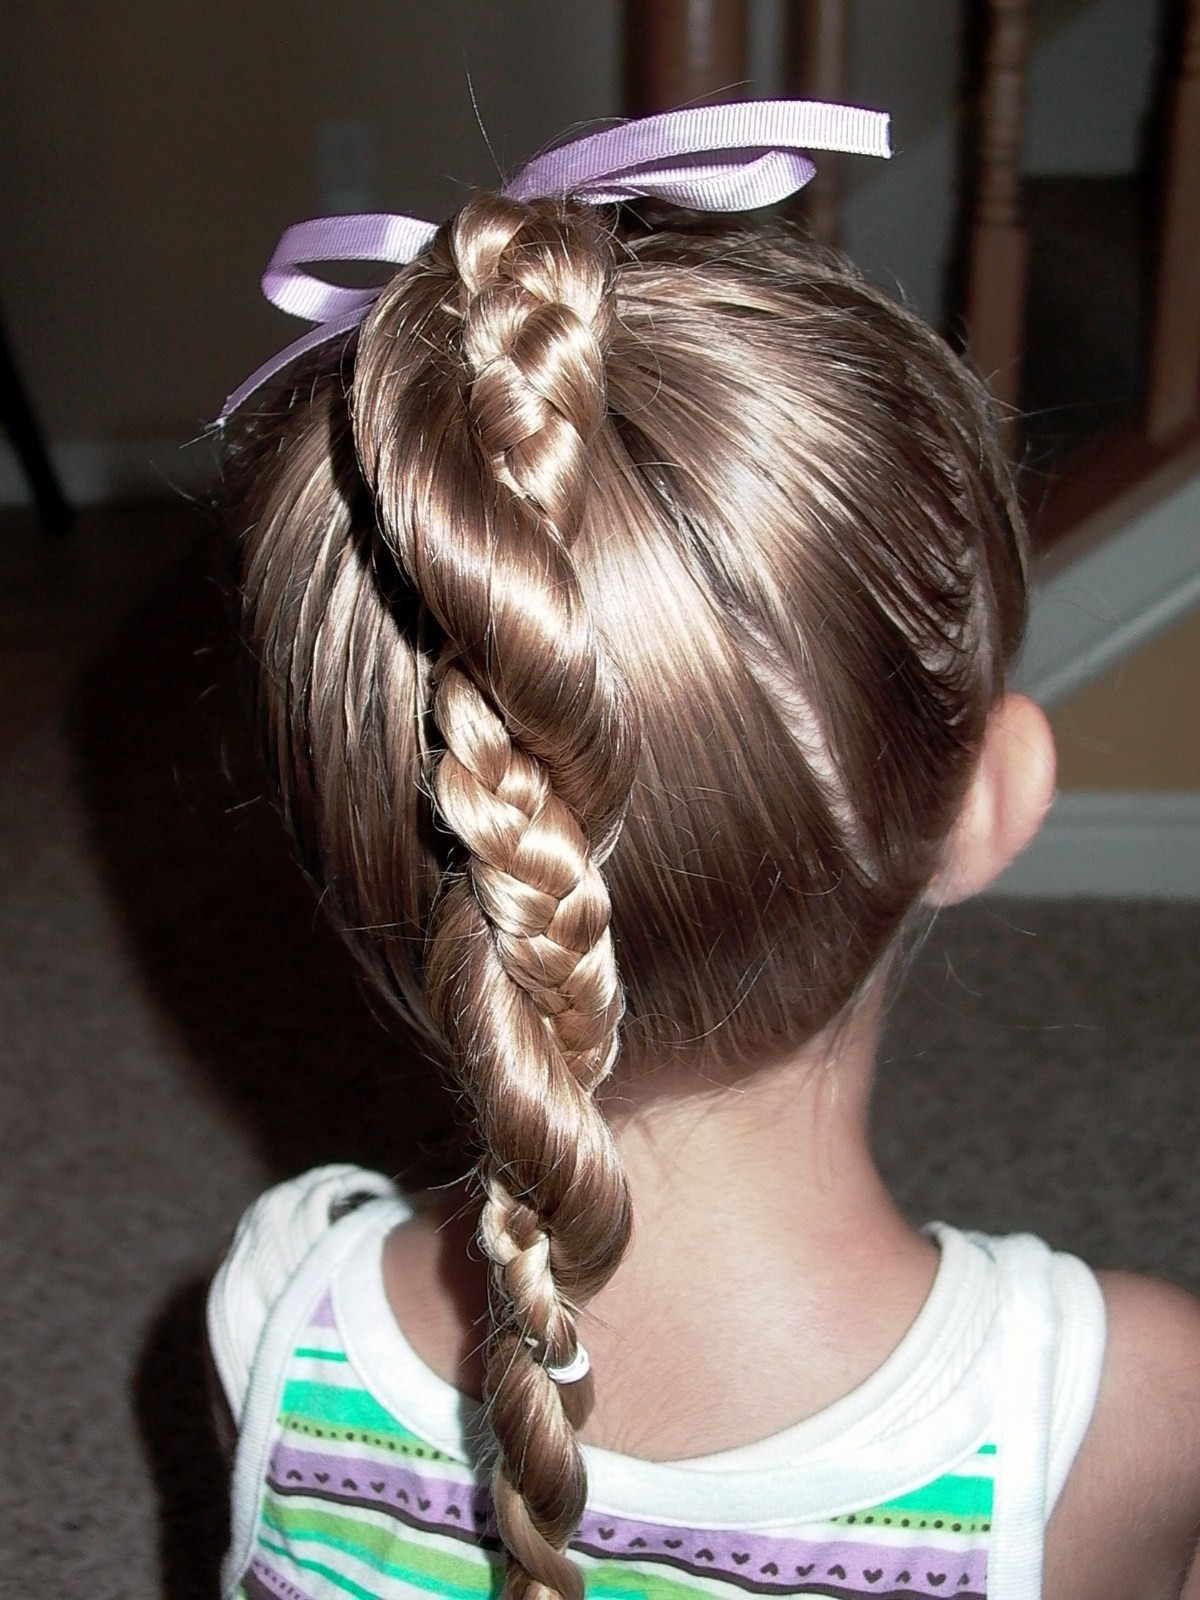 Simple Little Girl Hairstyles
 2010 Haircuts Style Little Girl s Hairstyles Easy Twist